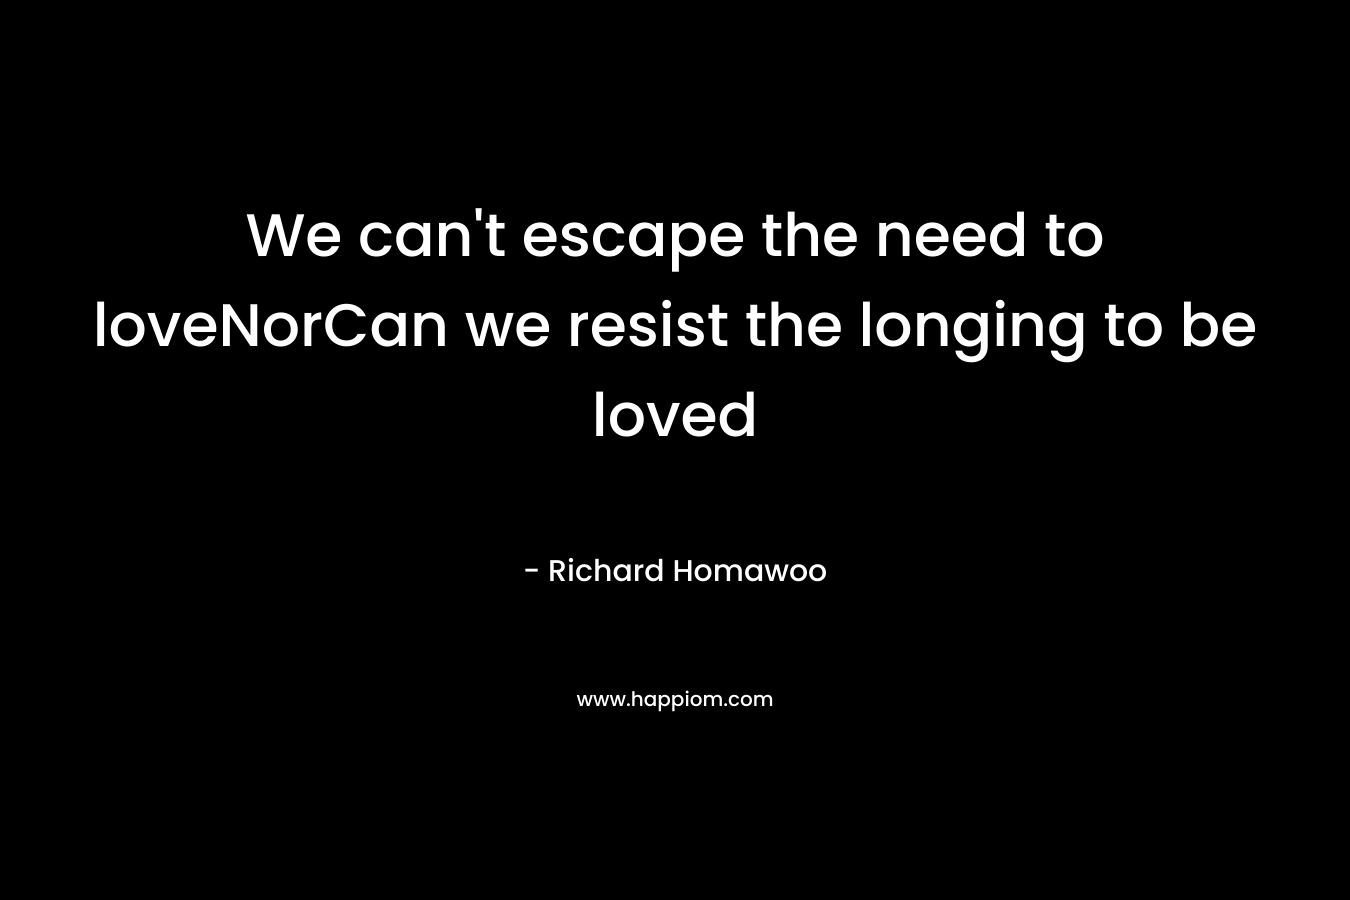 We can't escape the need to loveNorCan we resist the longing to be loved